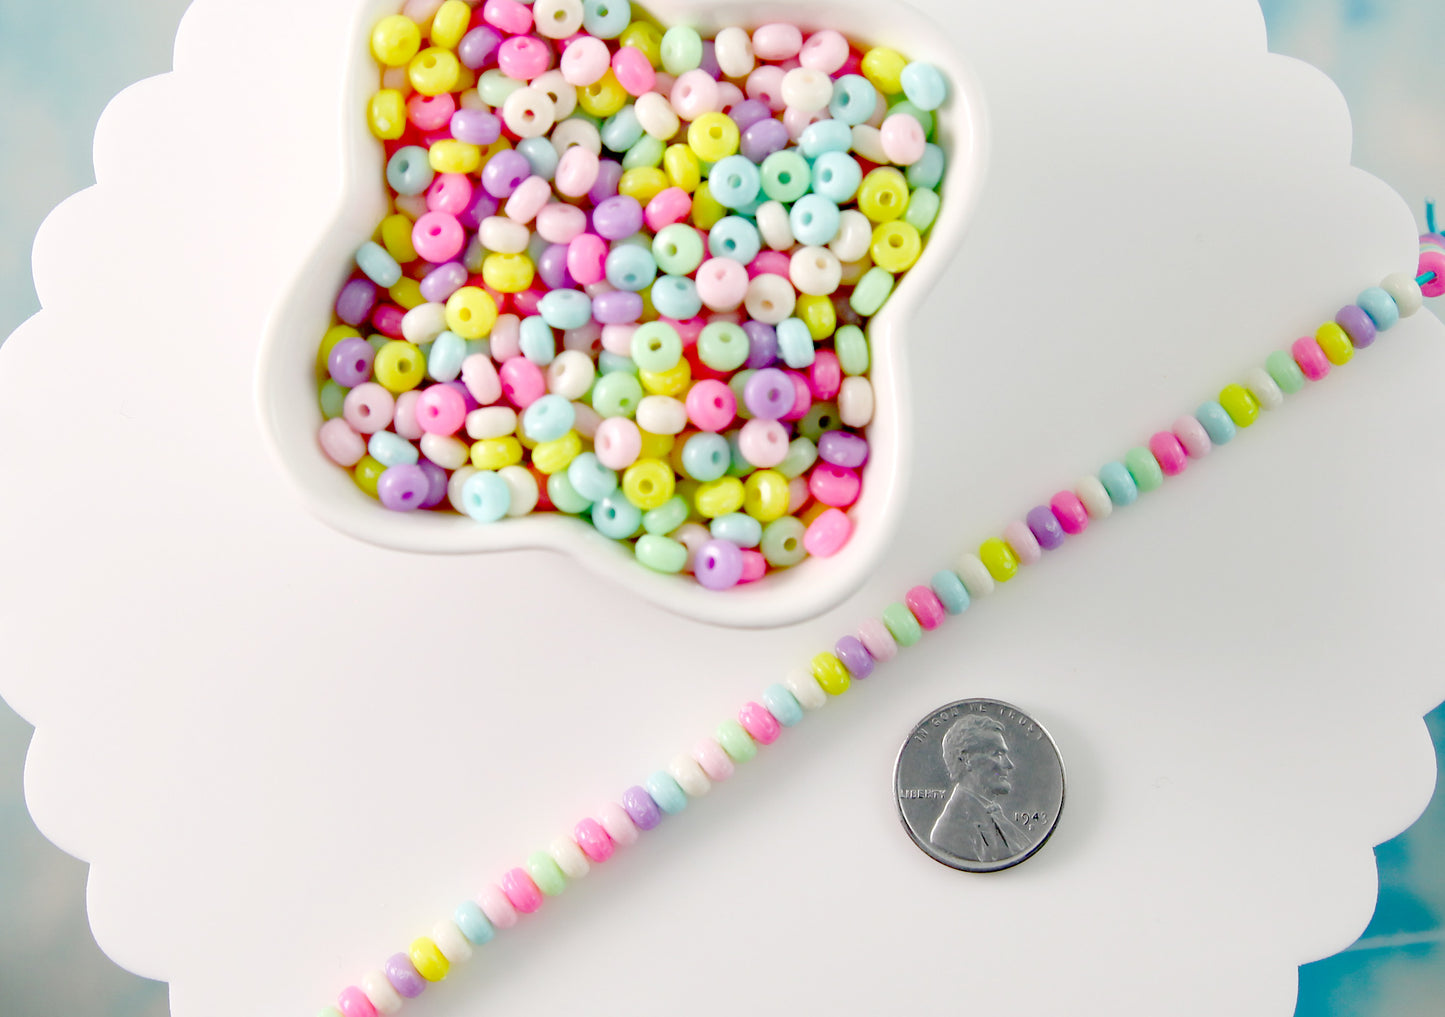 Candy Necklace Beads - 5mm Tiny Candy Color Rondelle Pastel Disc Shaped Faux Candies Acrylic or Plastic Beads - 500 pc set